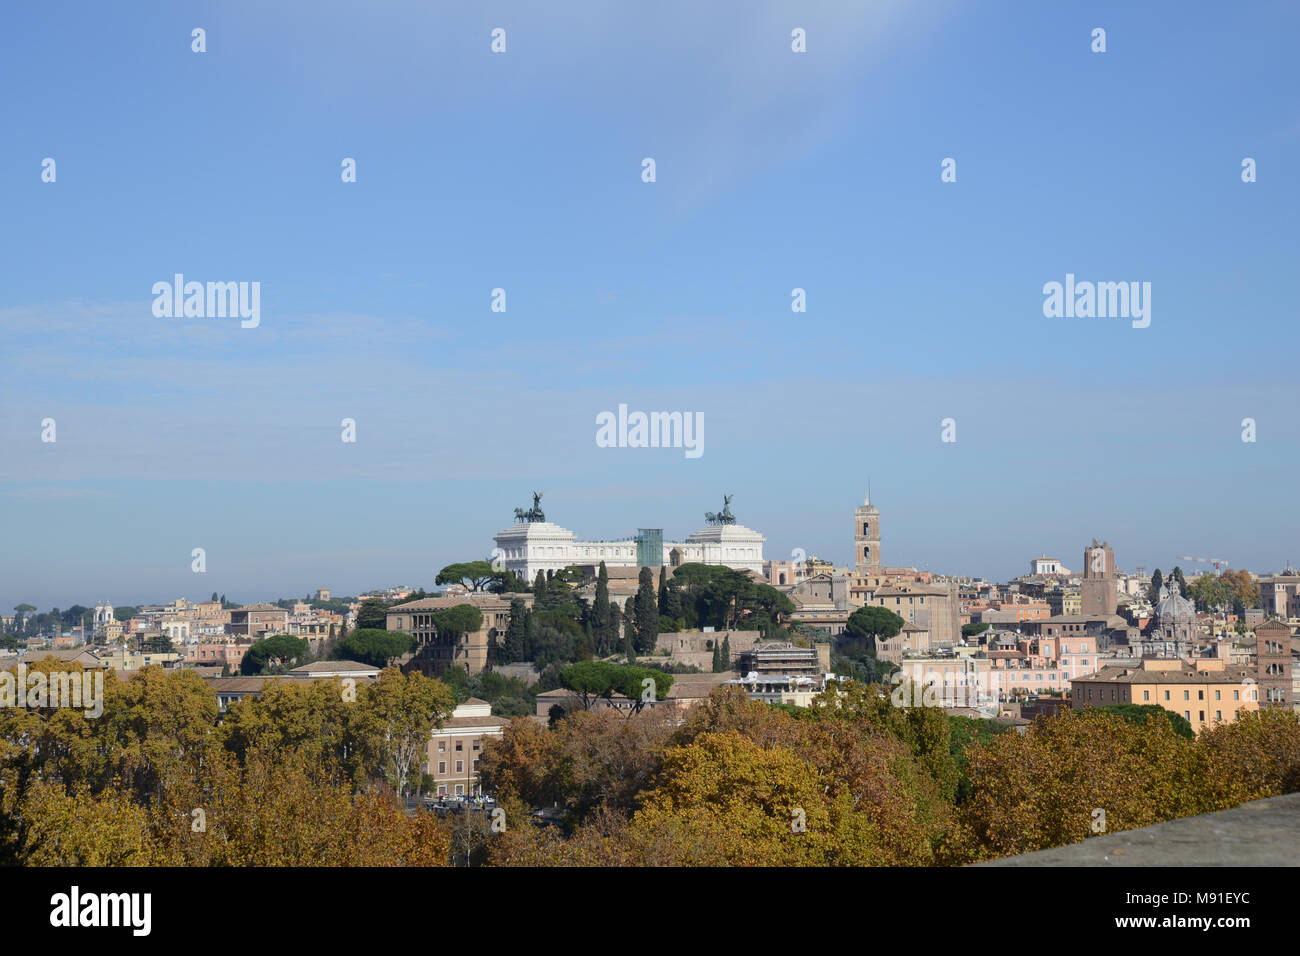 Altare della Patria seen high on the horizon in the distance from the Aventine Hill in Rome, Italy Stock Photo